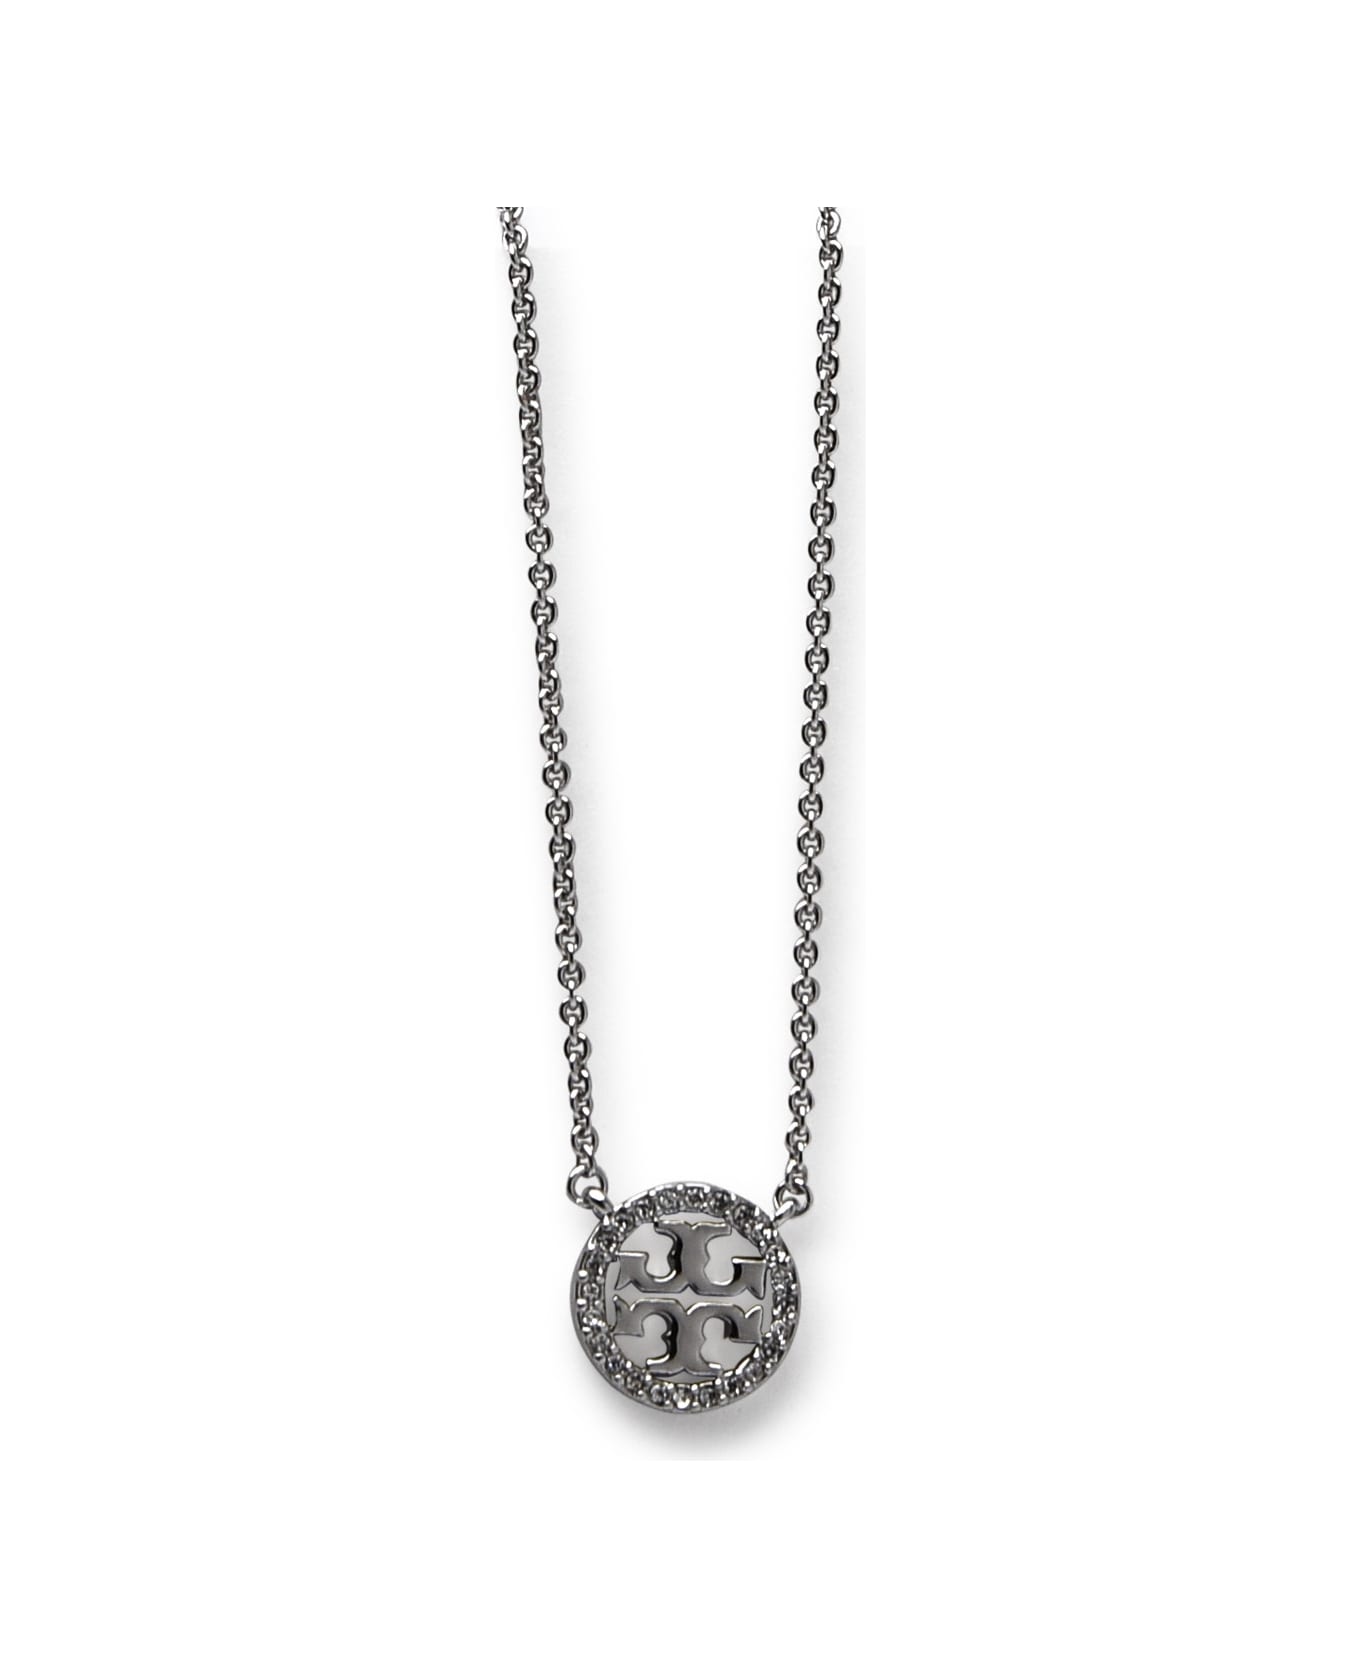 Tory Burch Miller Necklace - Silver